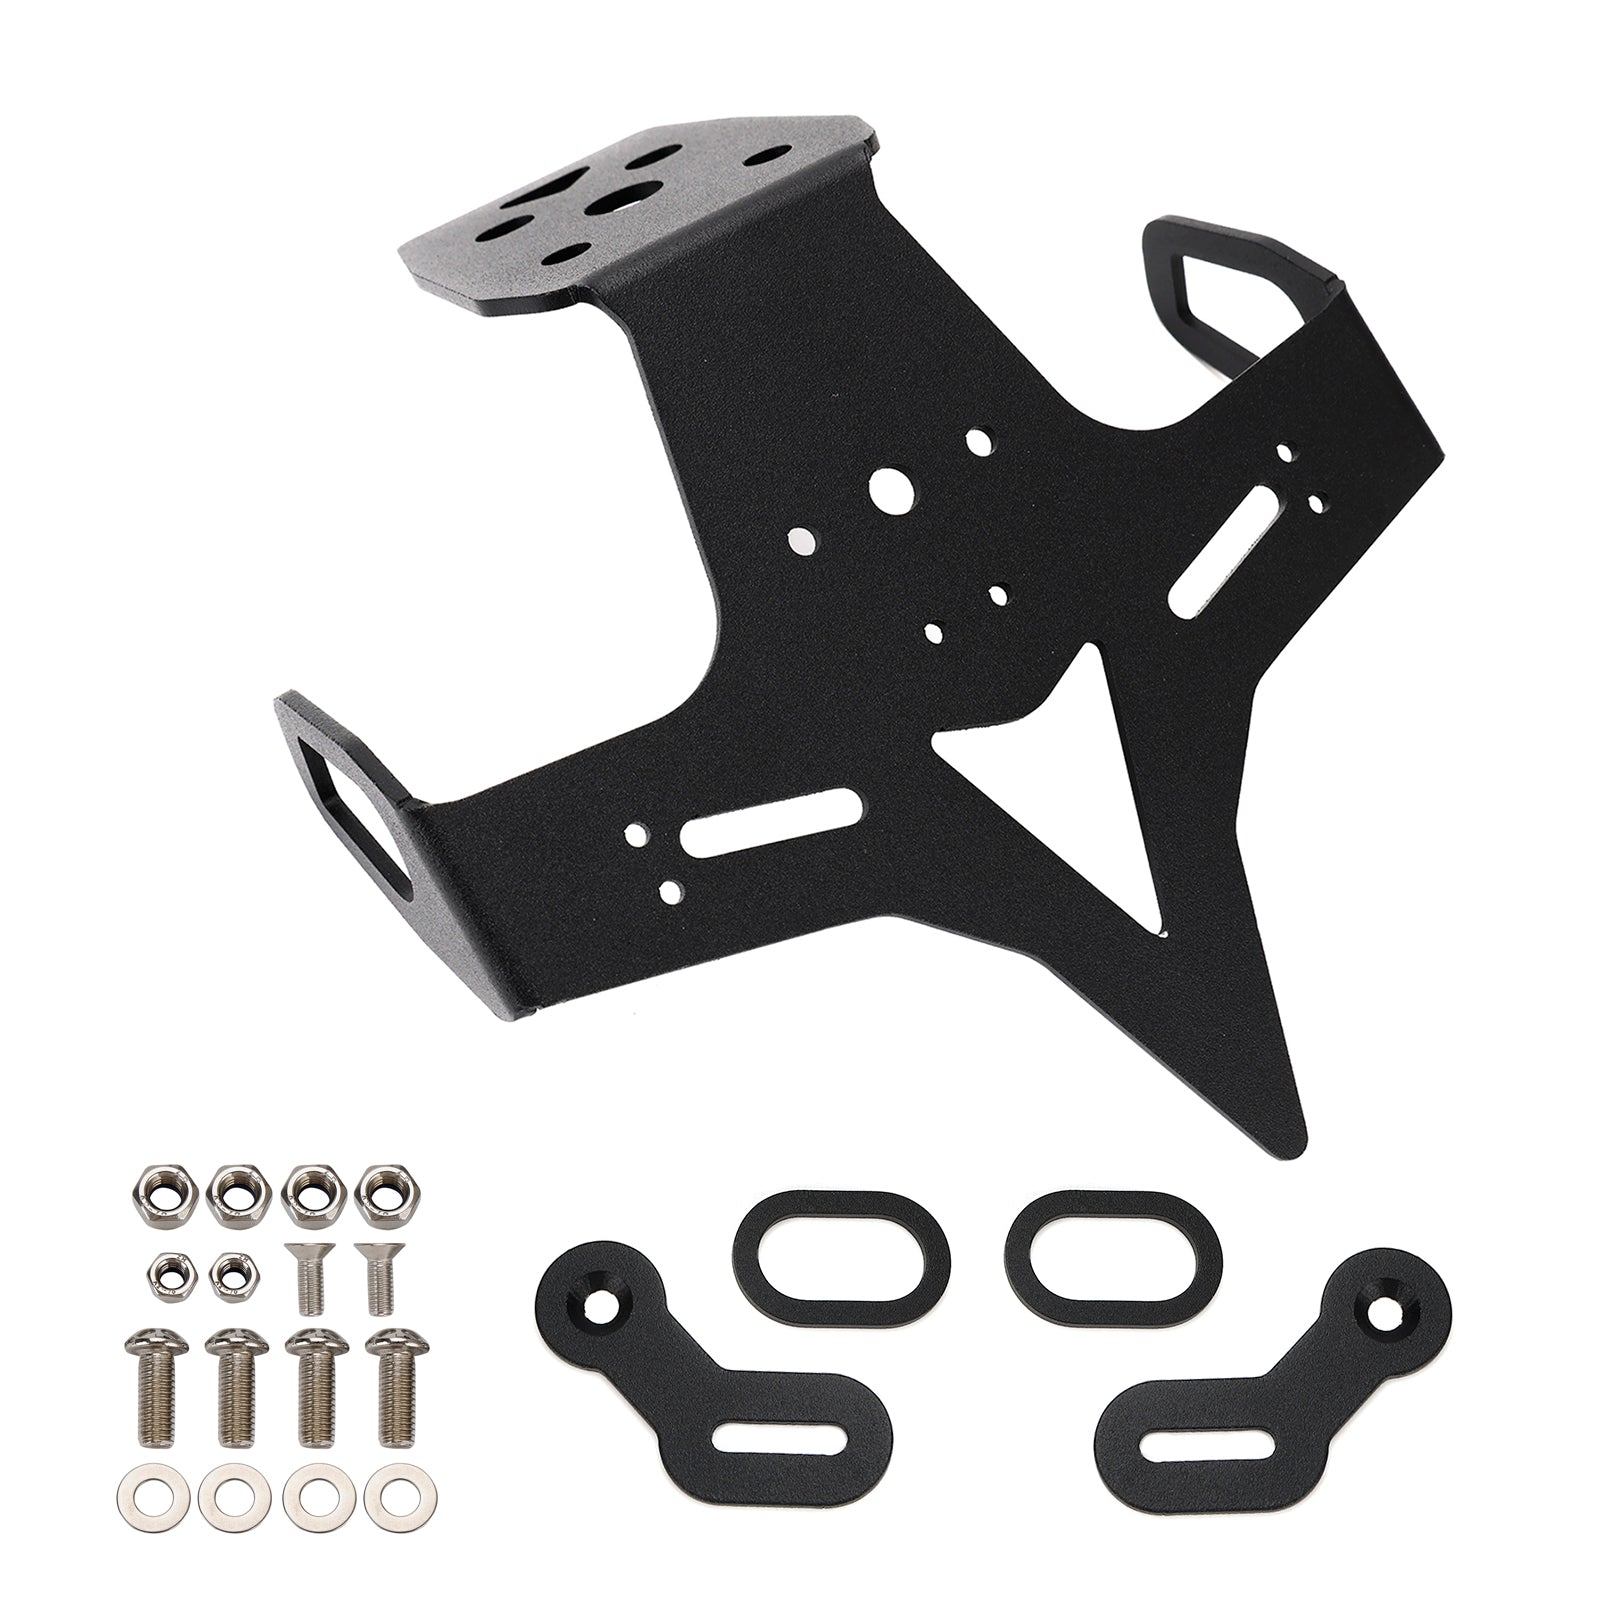 License Plate Holder Bracket fit for KAWASAKI ZX-25R 2021-2022